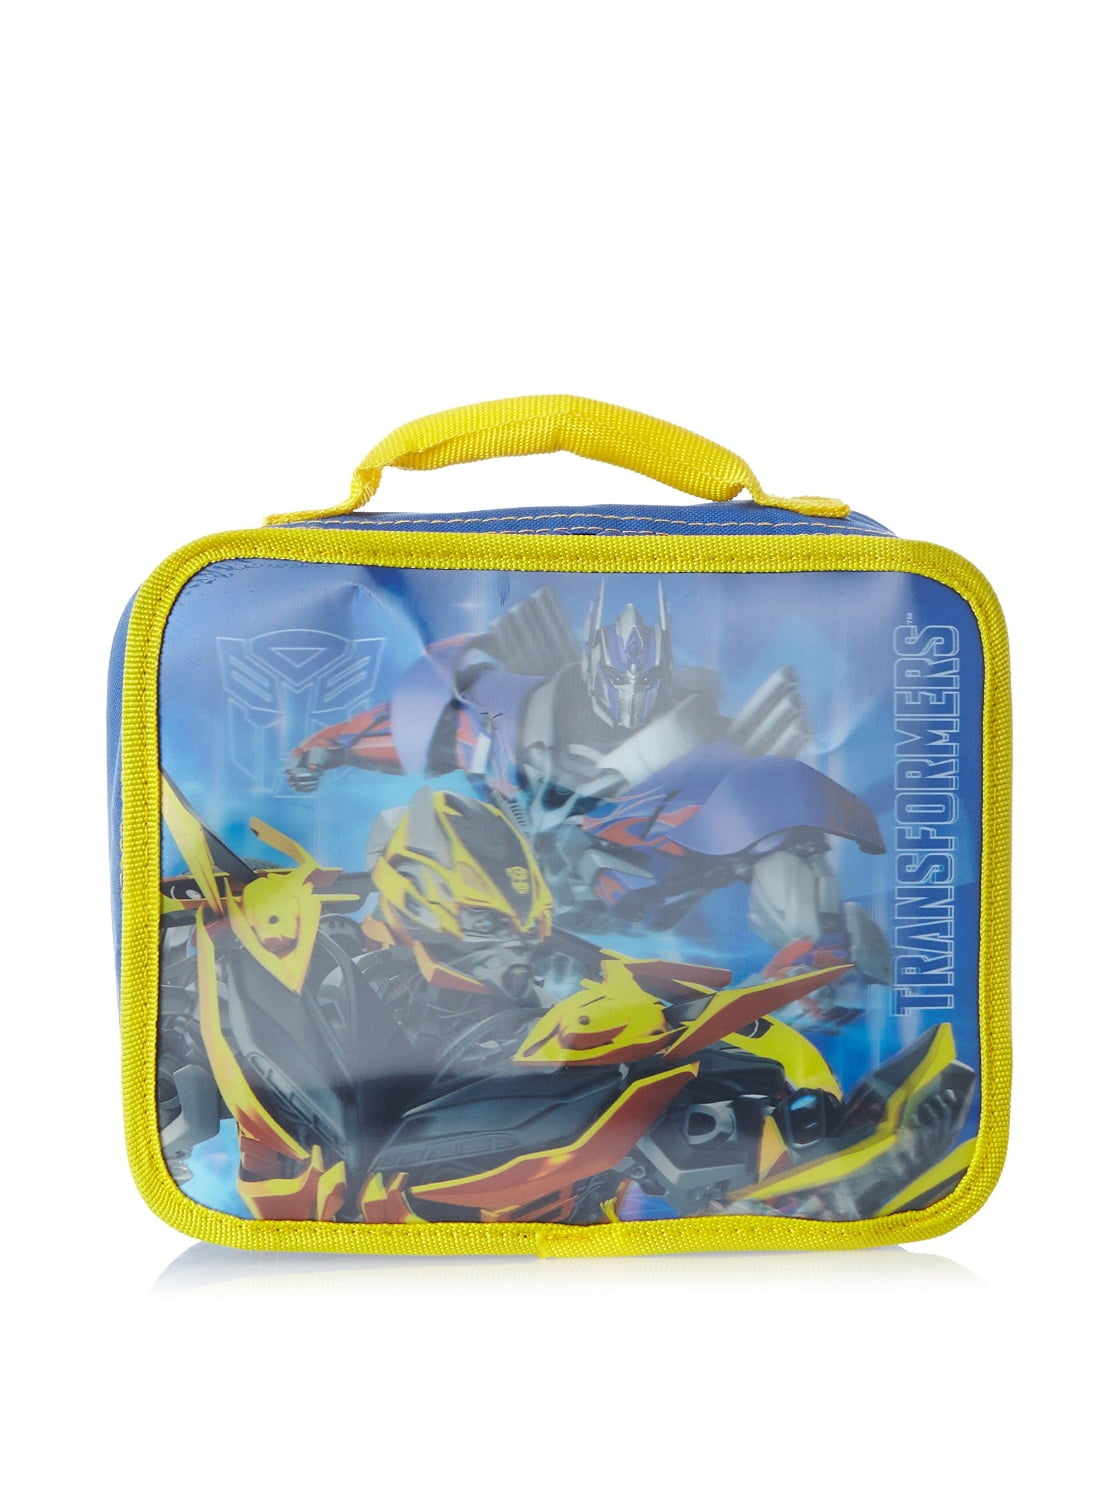 Transformers Bumblebee Boys Insulated Lunch Bag 